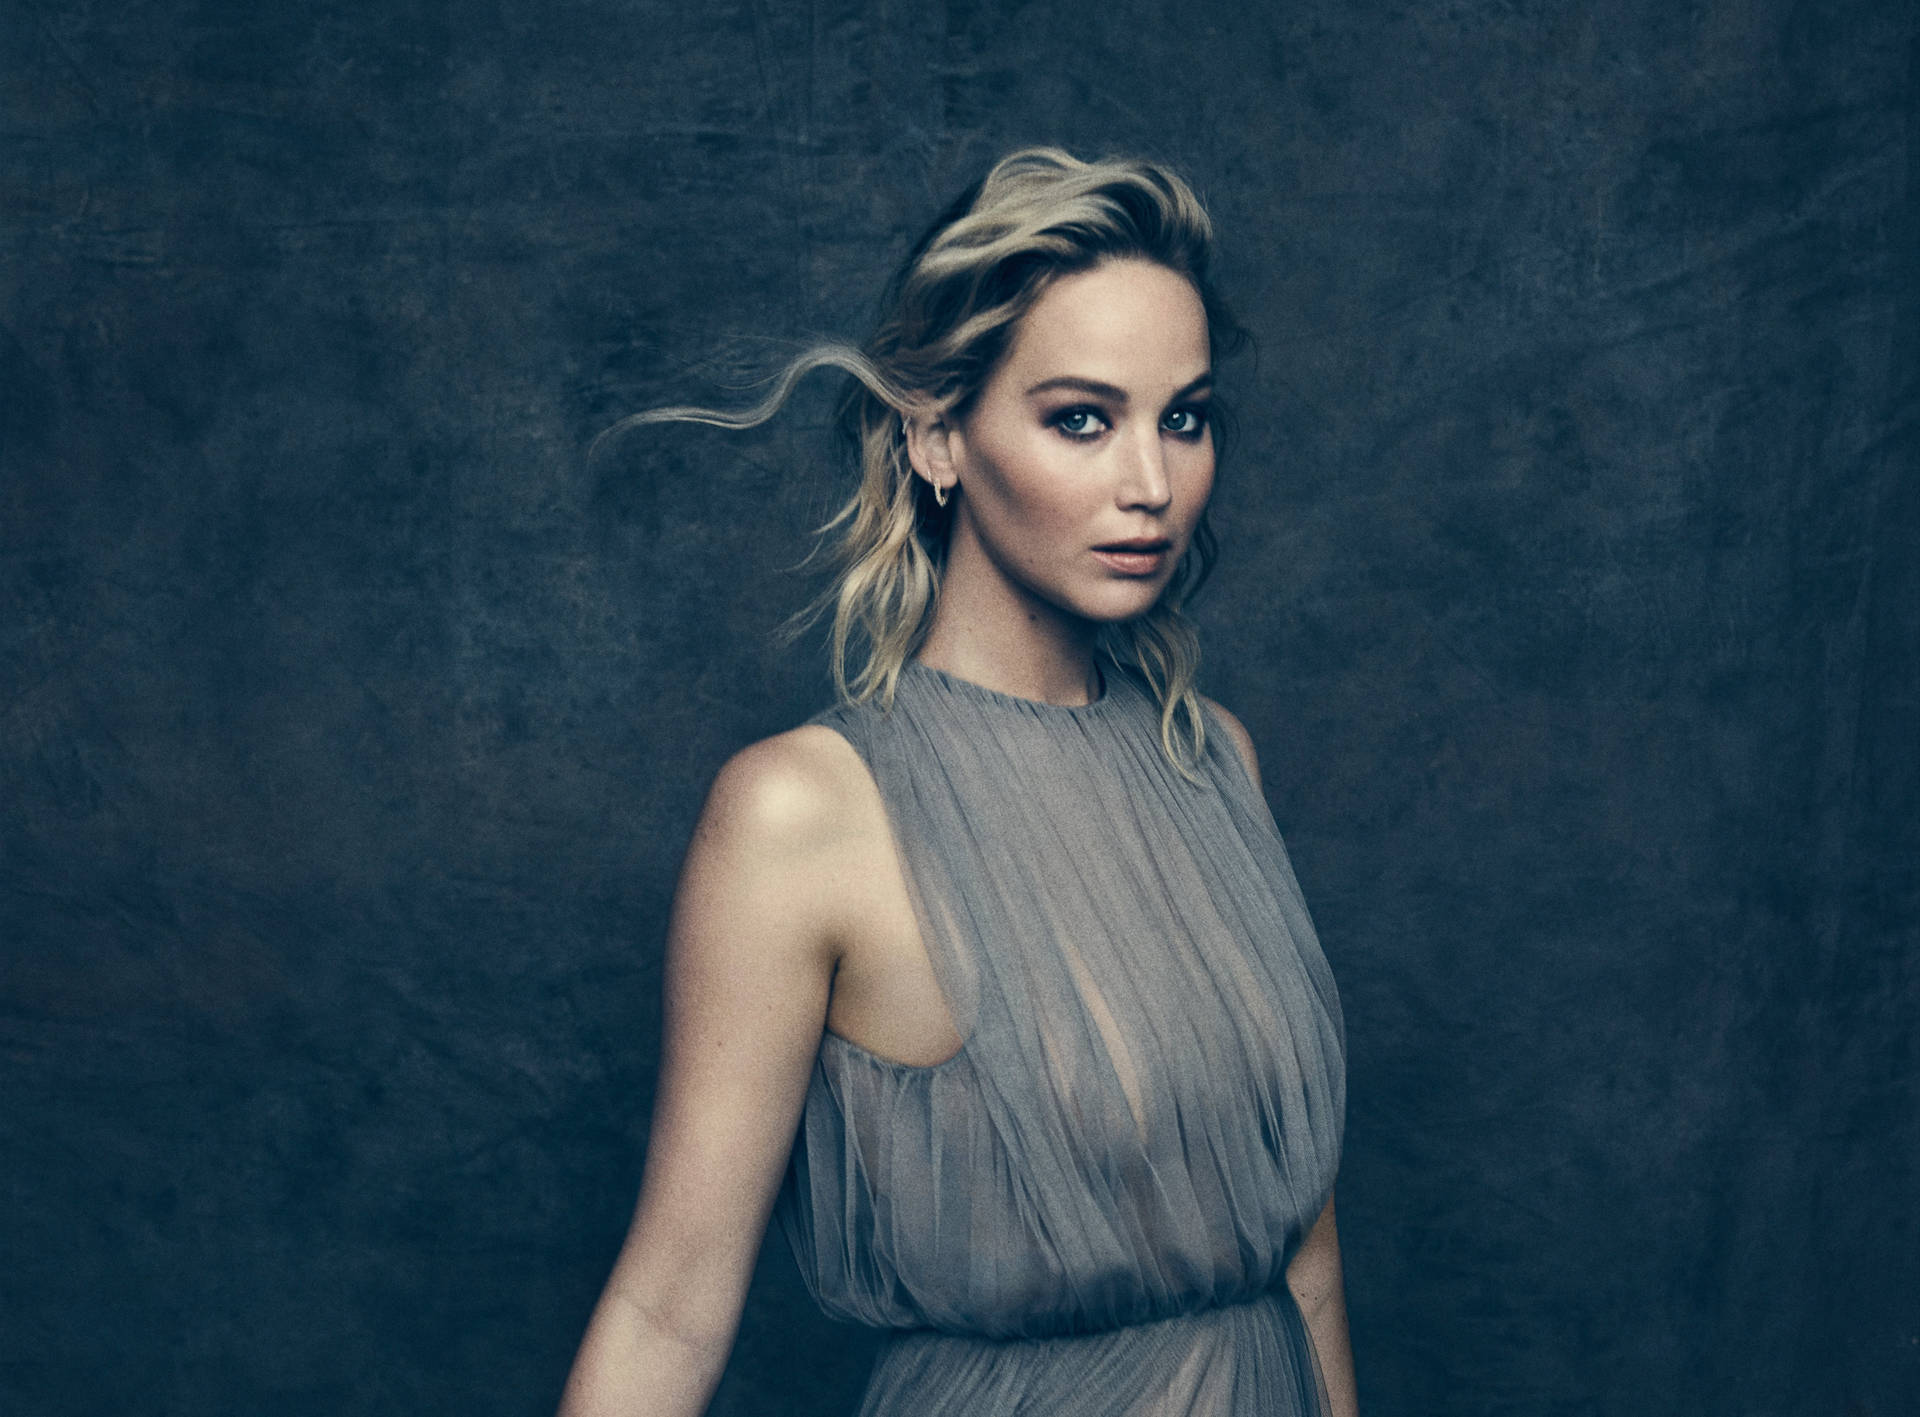 Jennifer Lawrence is an American actress and singer. She has won several awards, including an Academy Award, a Golden Globe Award, and a Screen Actors Guild Award. - Jennifer Lawrence